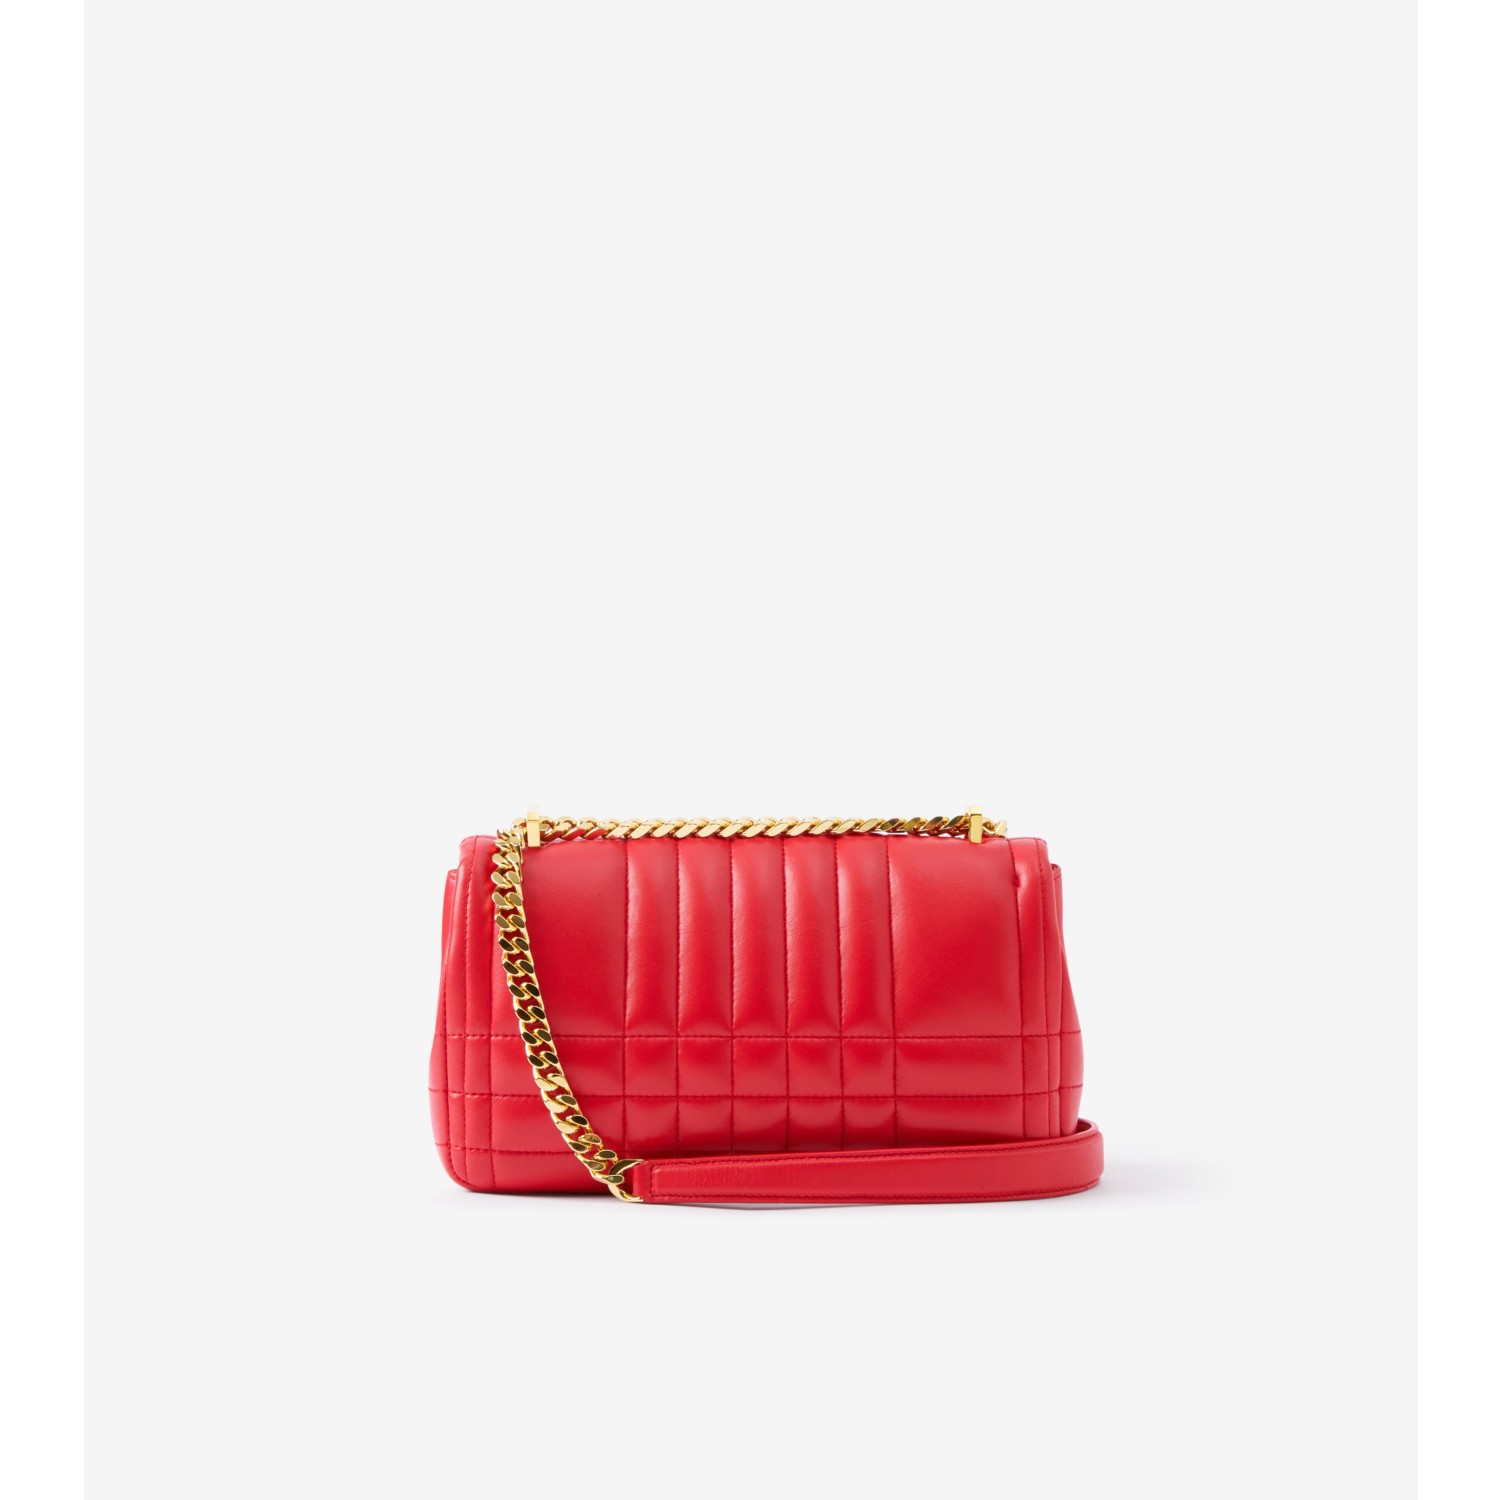 Small Lola Bag in Bright Red - Women